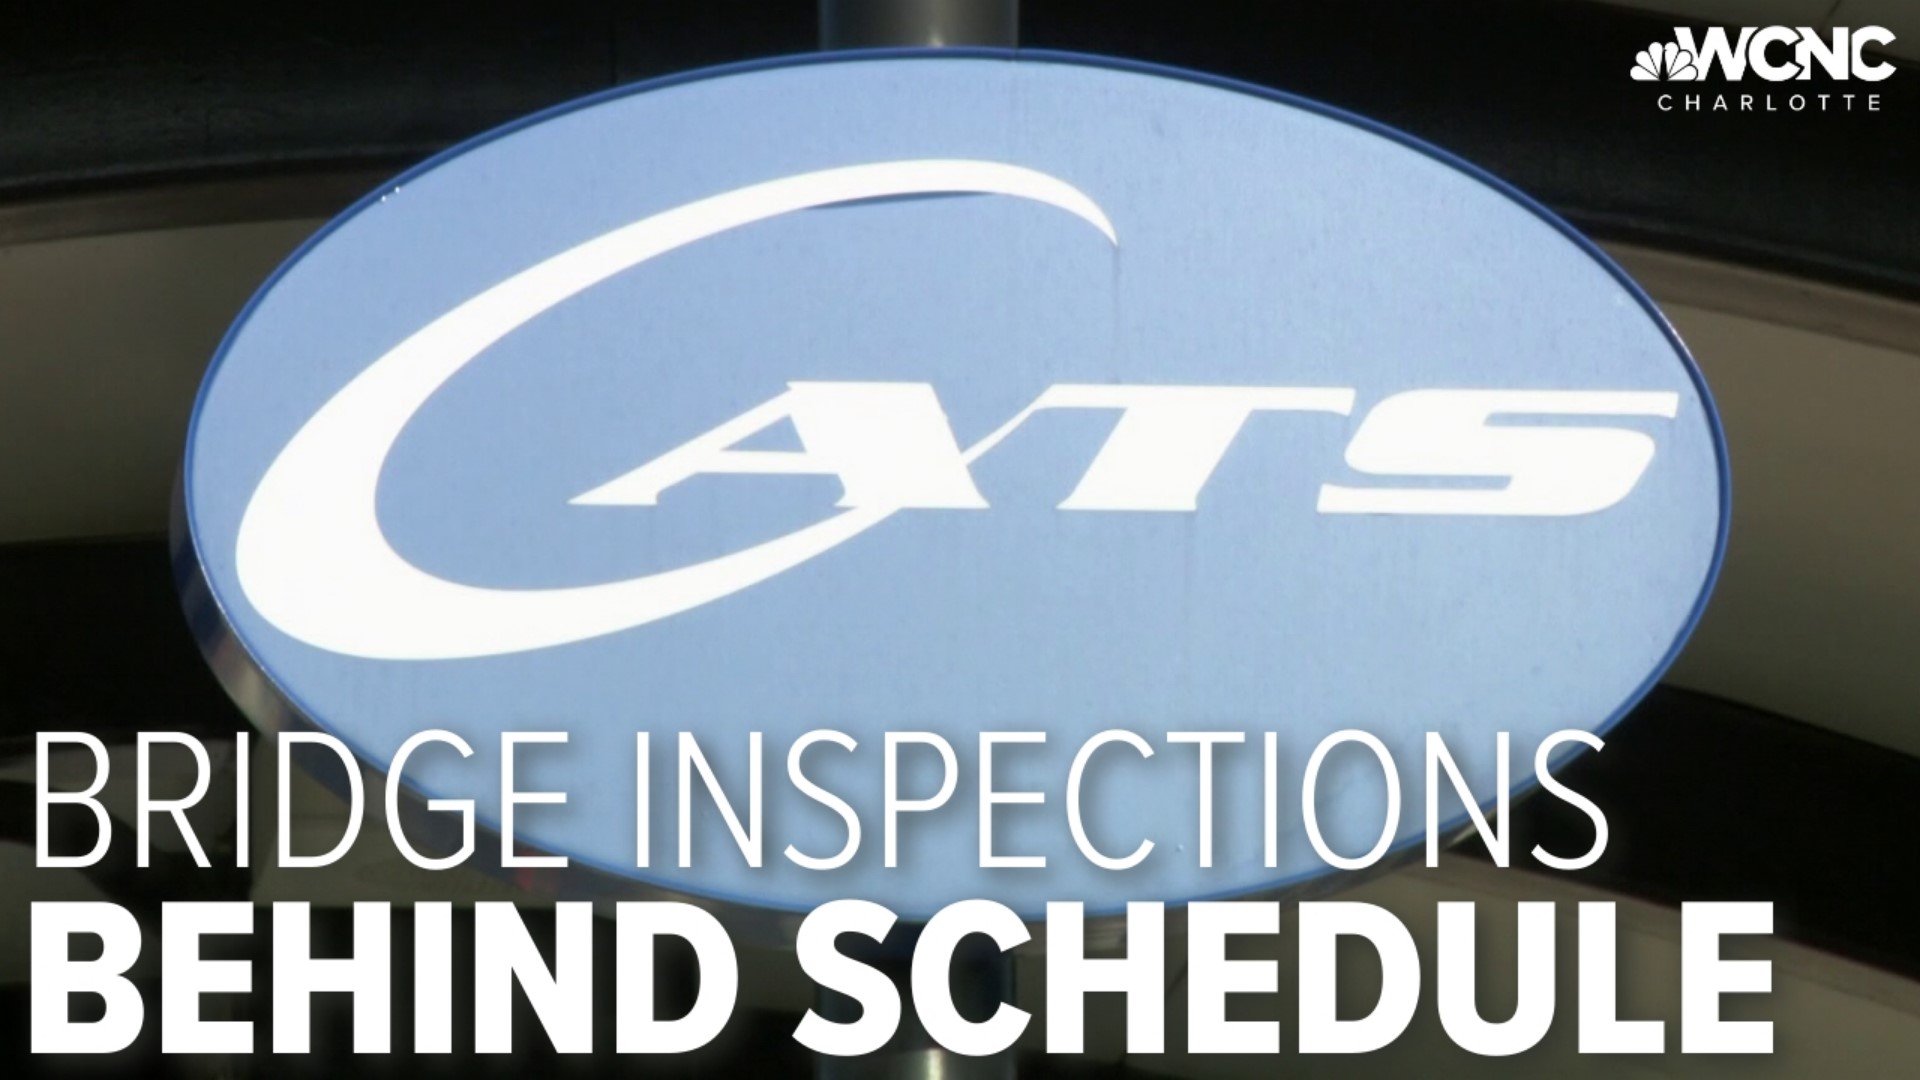 MTC members learned that CATS bridge inspections didn't happen in 2021, meaning inspections are two years past due. The last time they were inspected was in 2019.